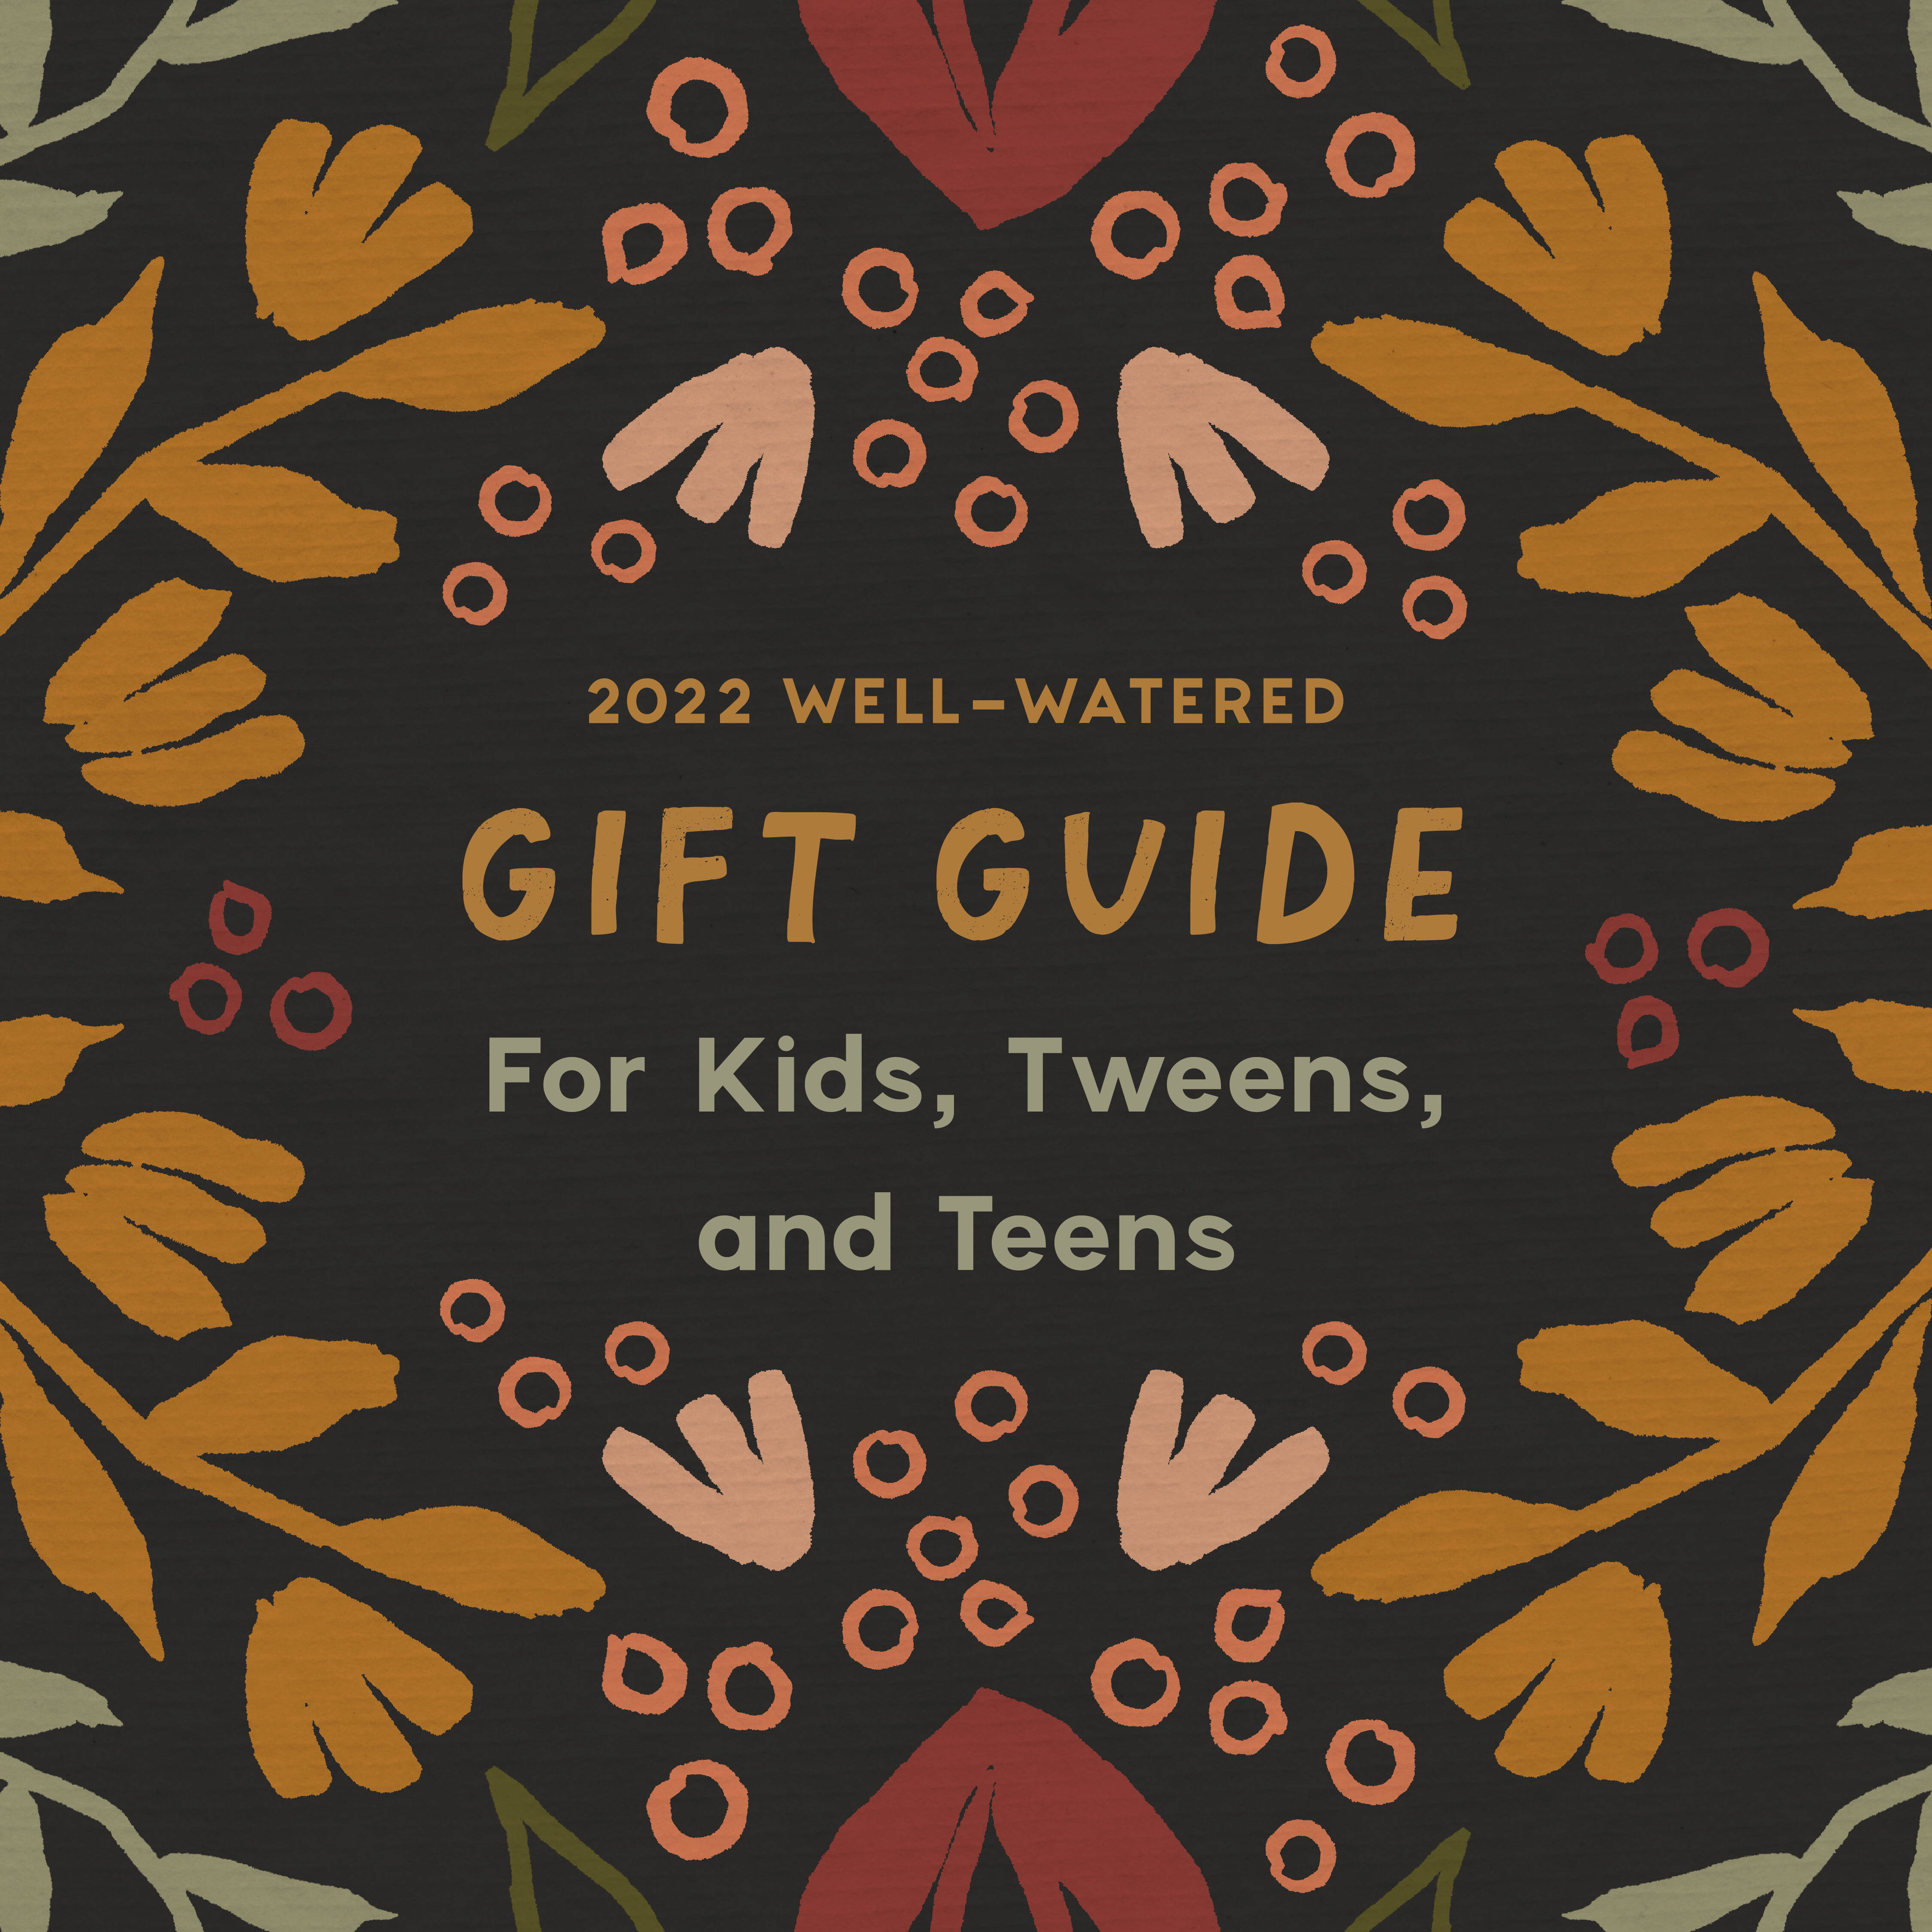 Gift Guide: For Kids, Tweens, and Teens